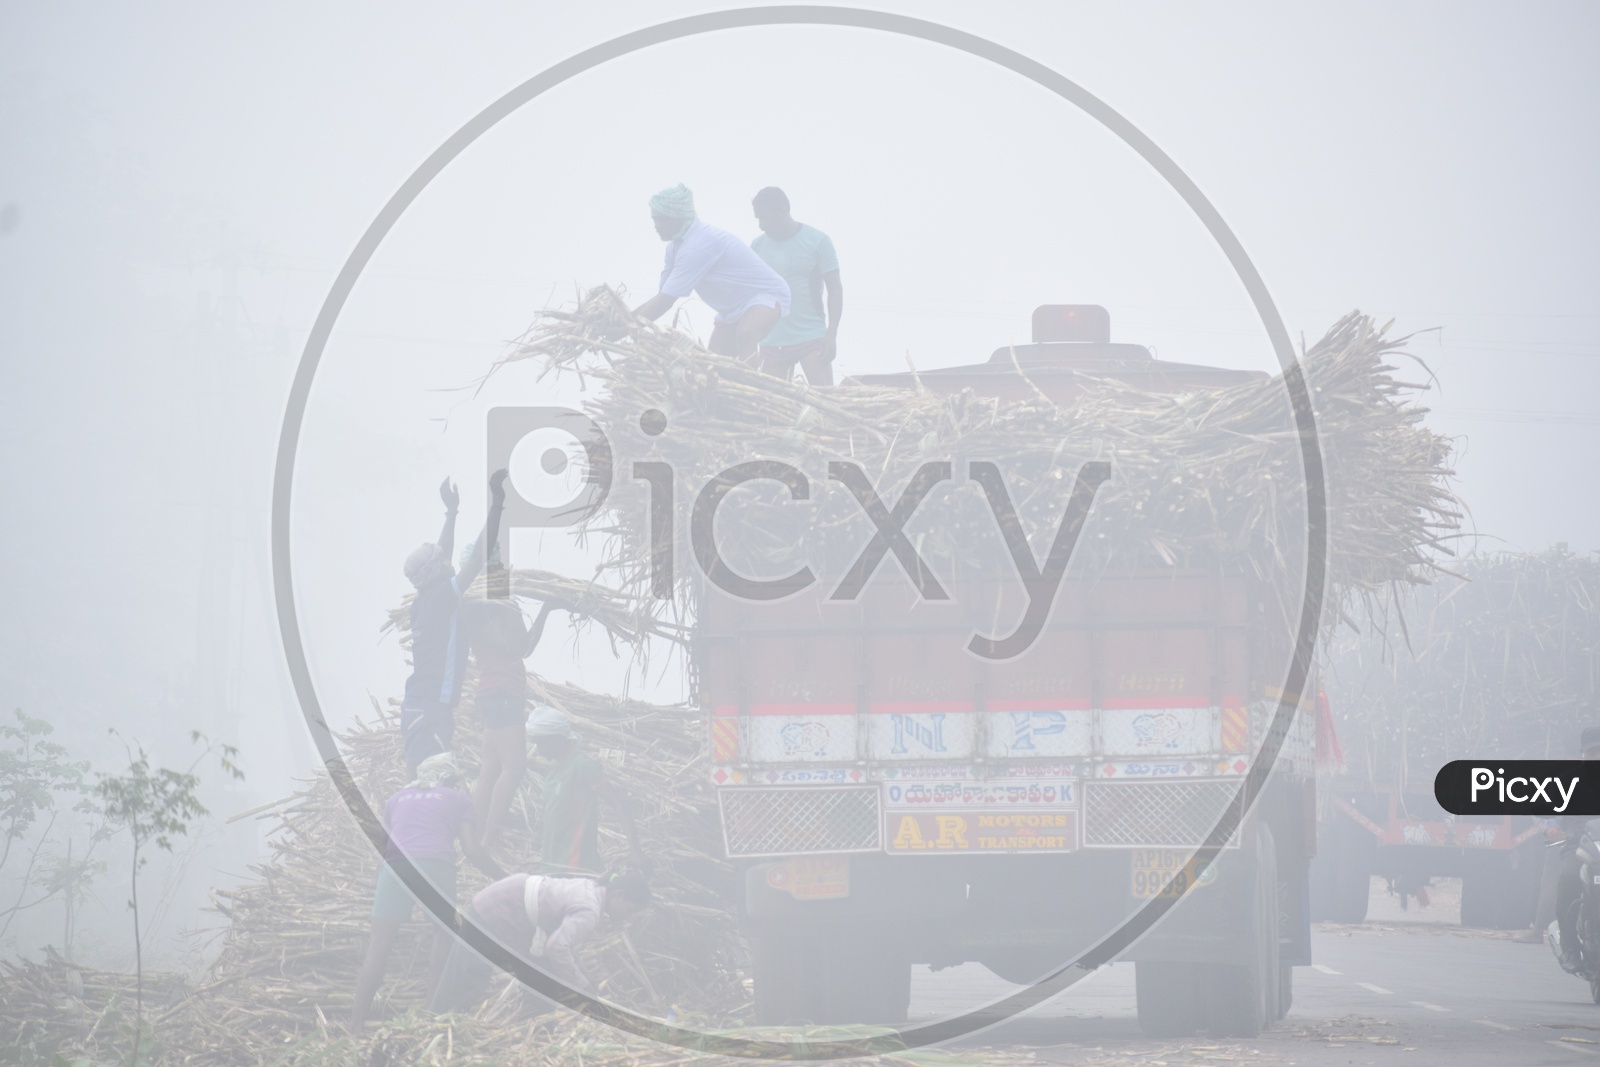 Farmers Loading The Fresh Yield of Sugarcane Into  Trucks Or Lorries On a Foggy Morning